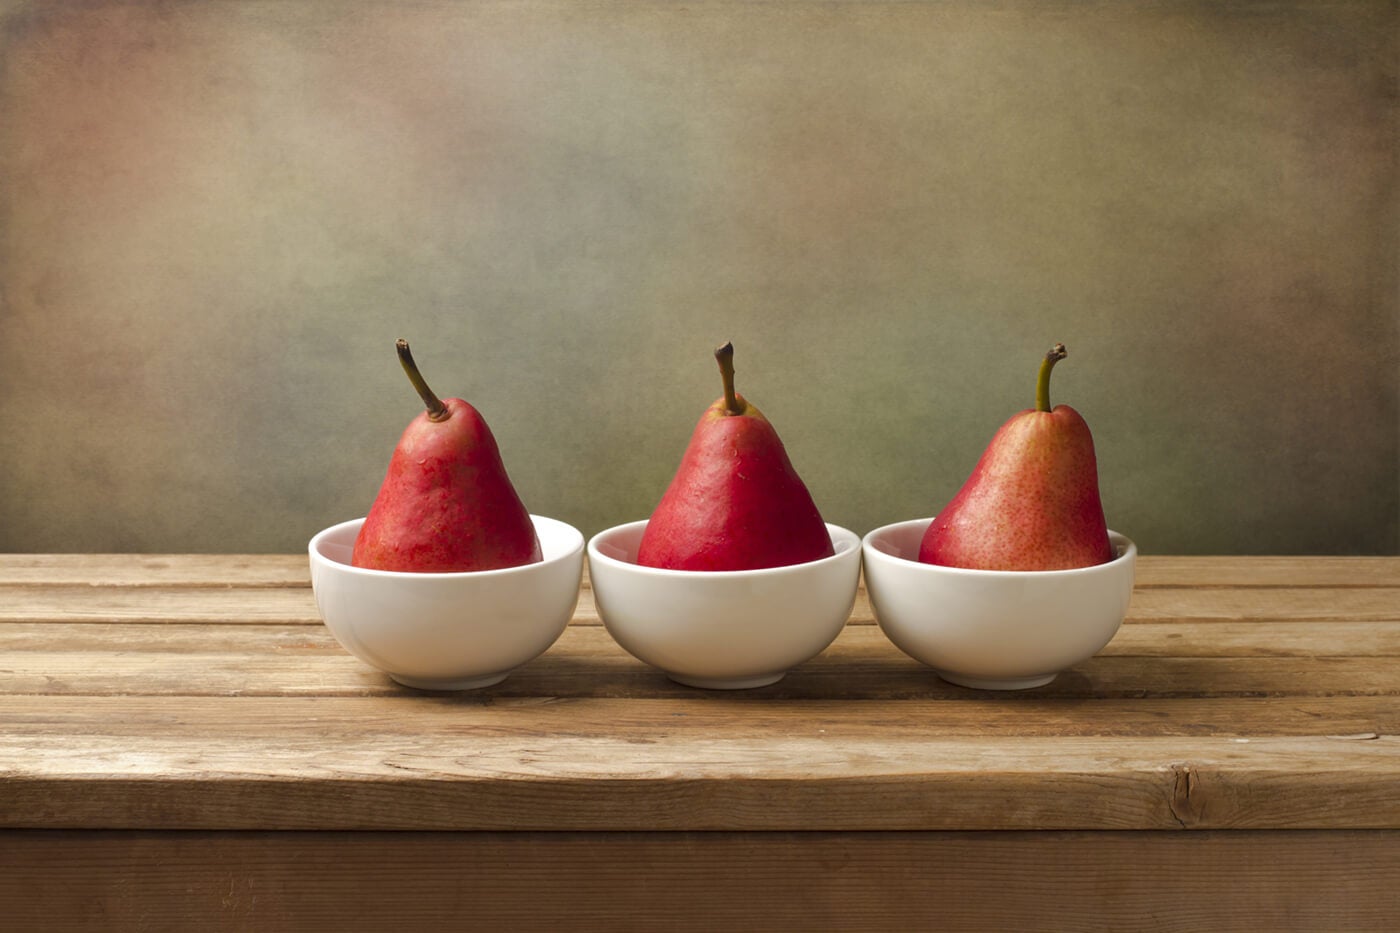 pears and bowls as fine art photo prints